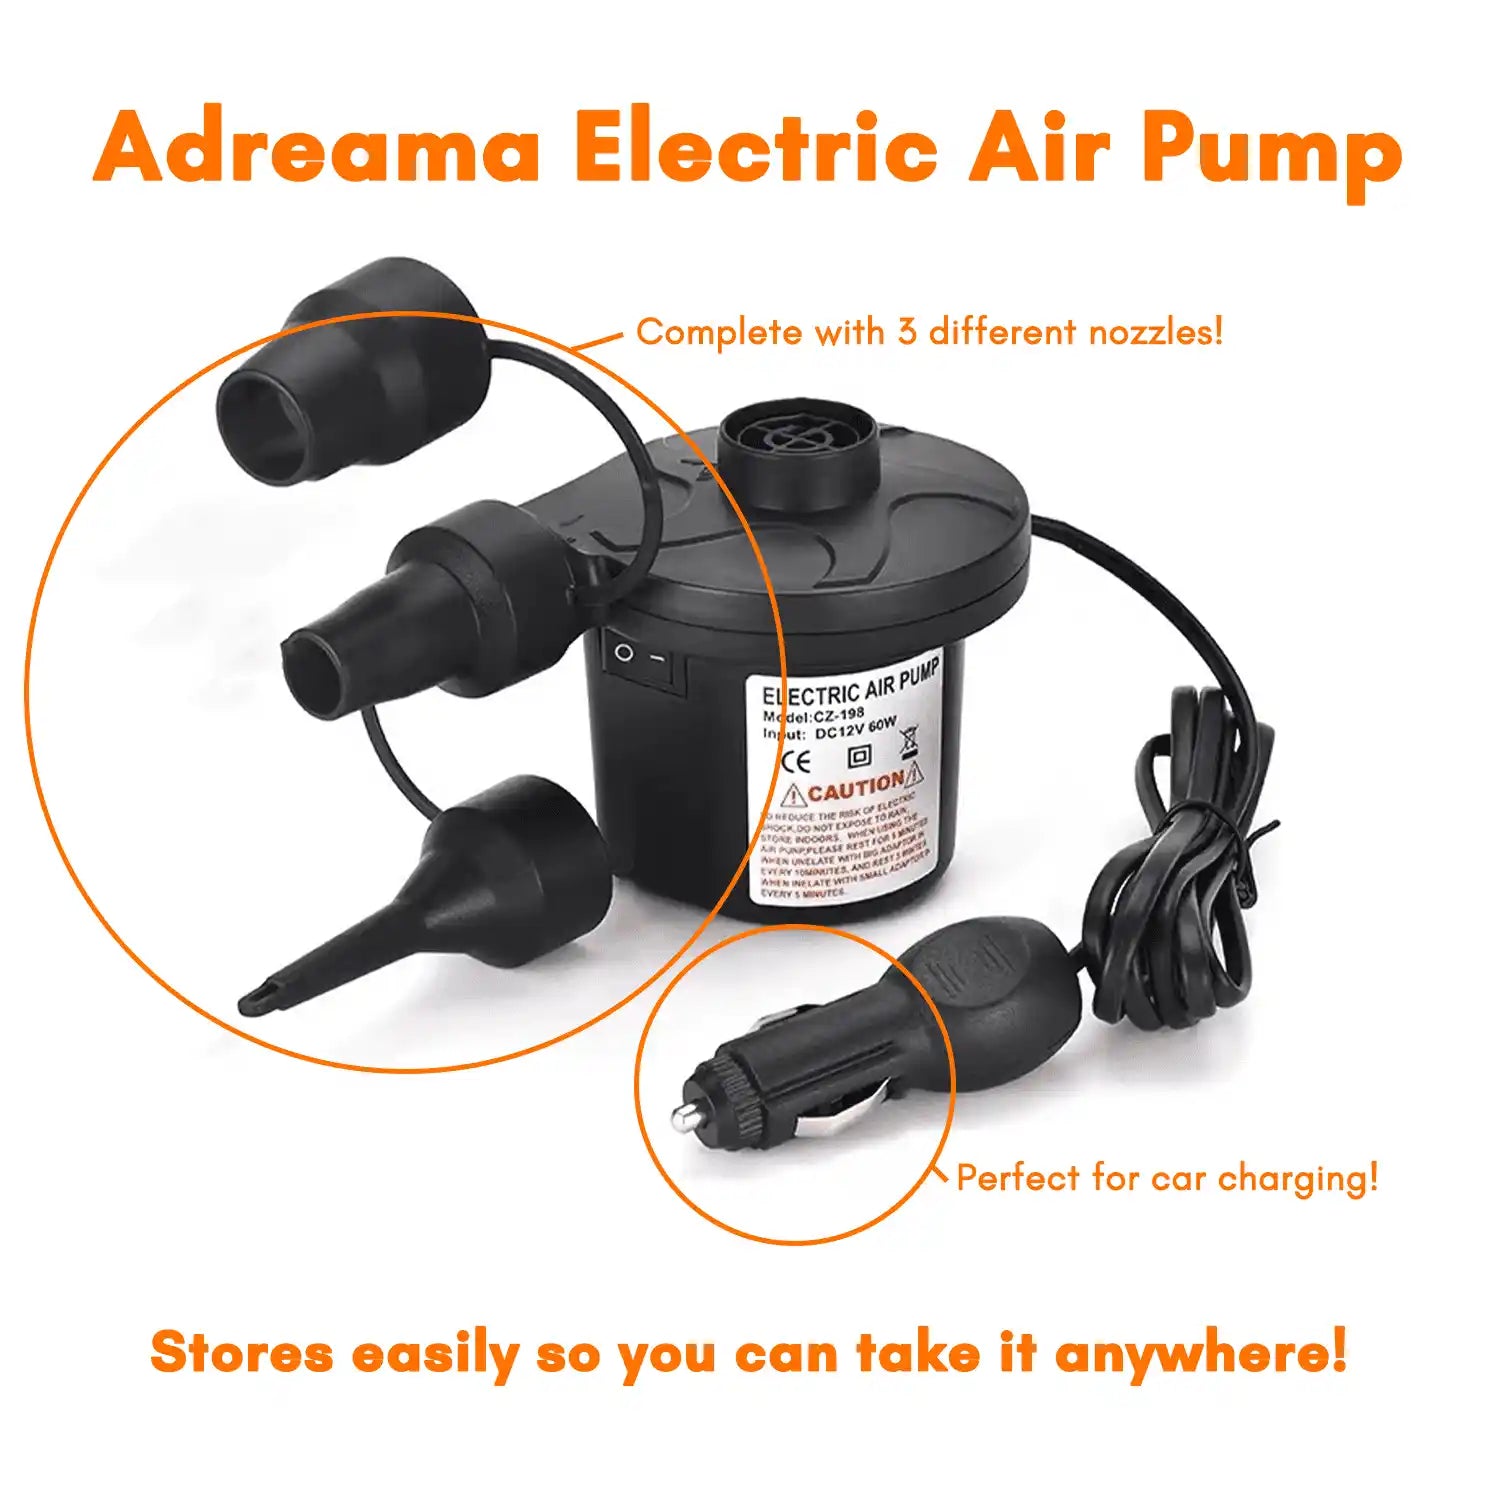 Adreama Electric Air Pump for Inflatable Products